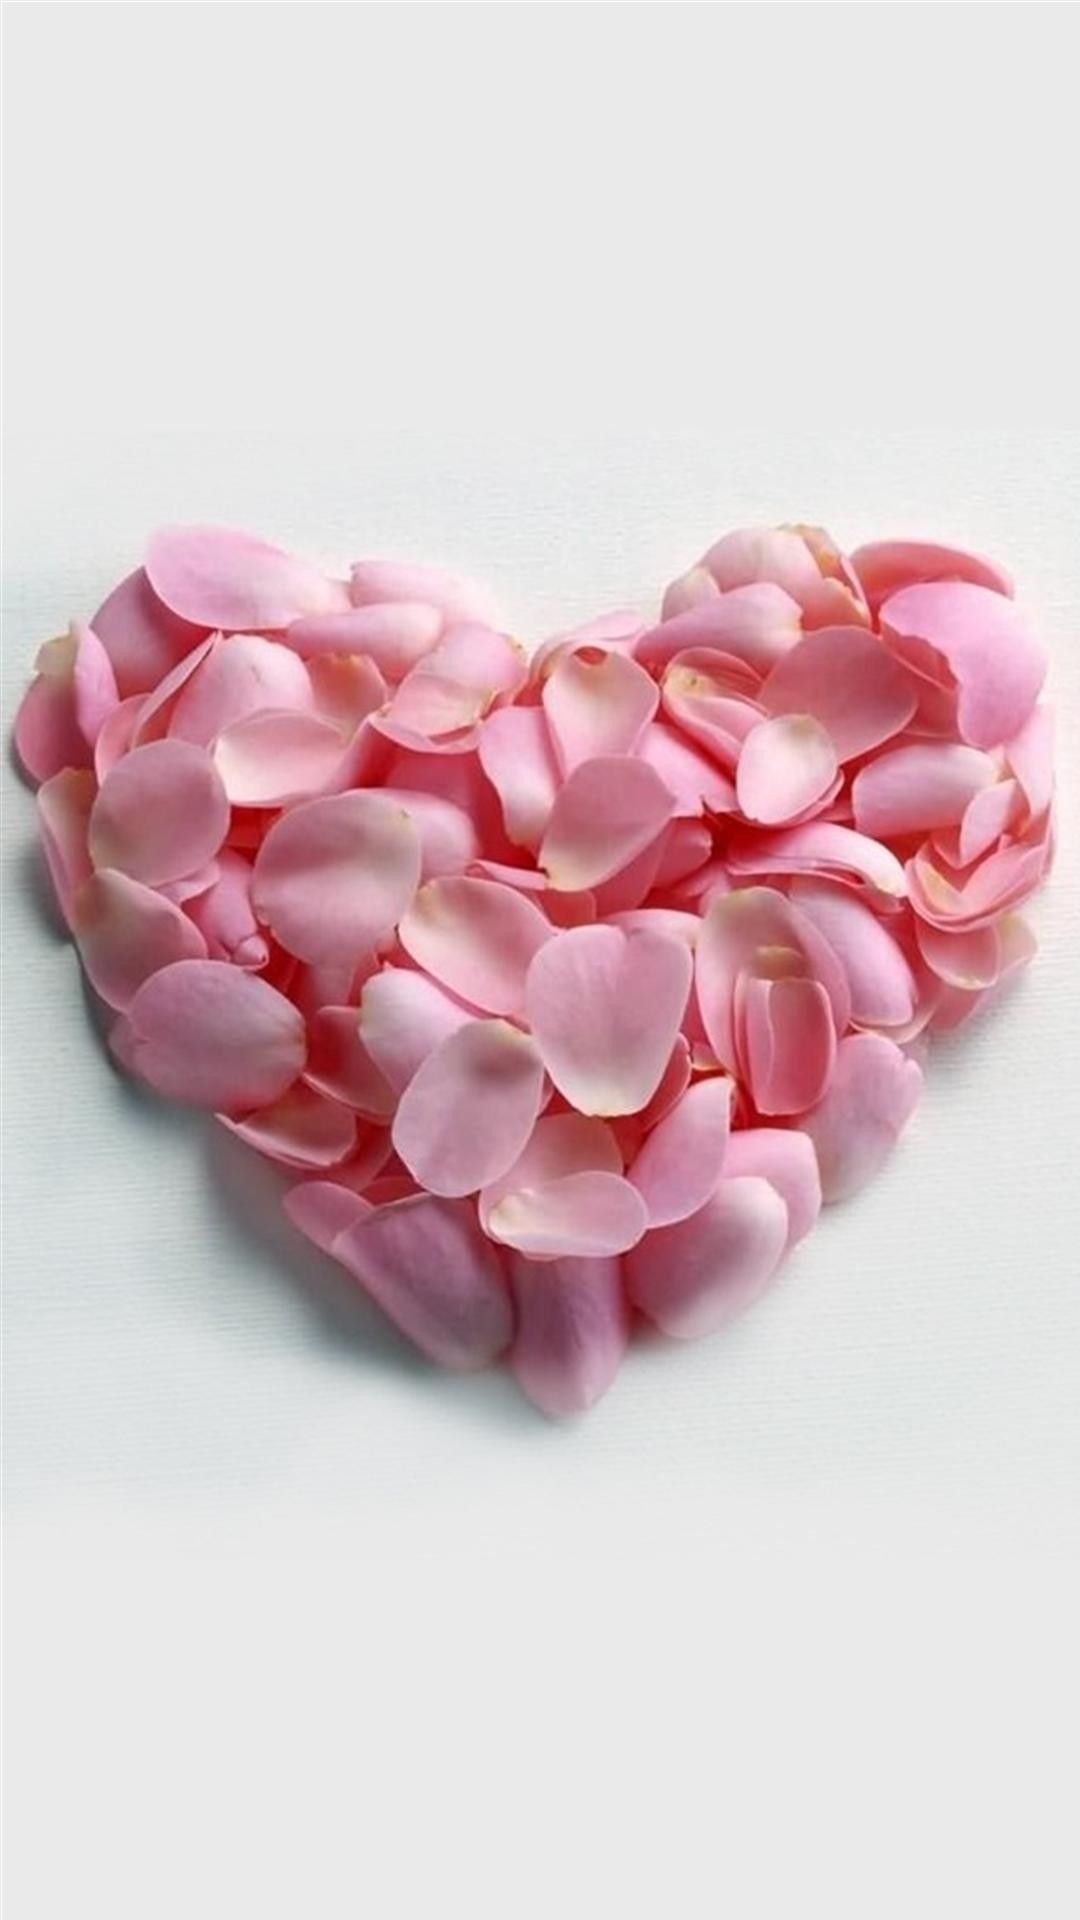 Pink Rose Petals Heart Shaped Valentines Day Android Wallpaper